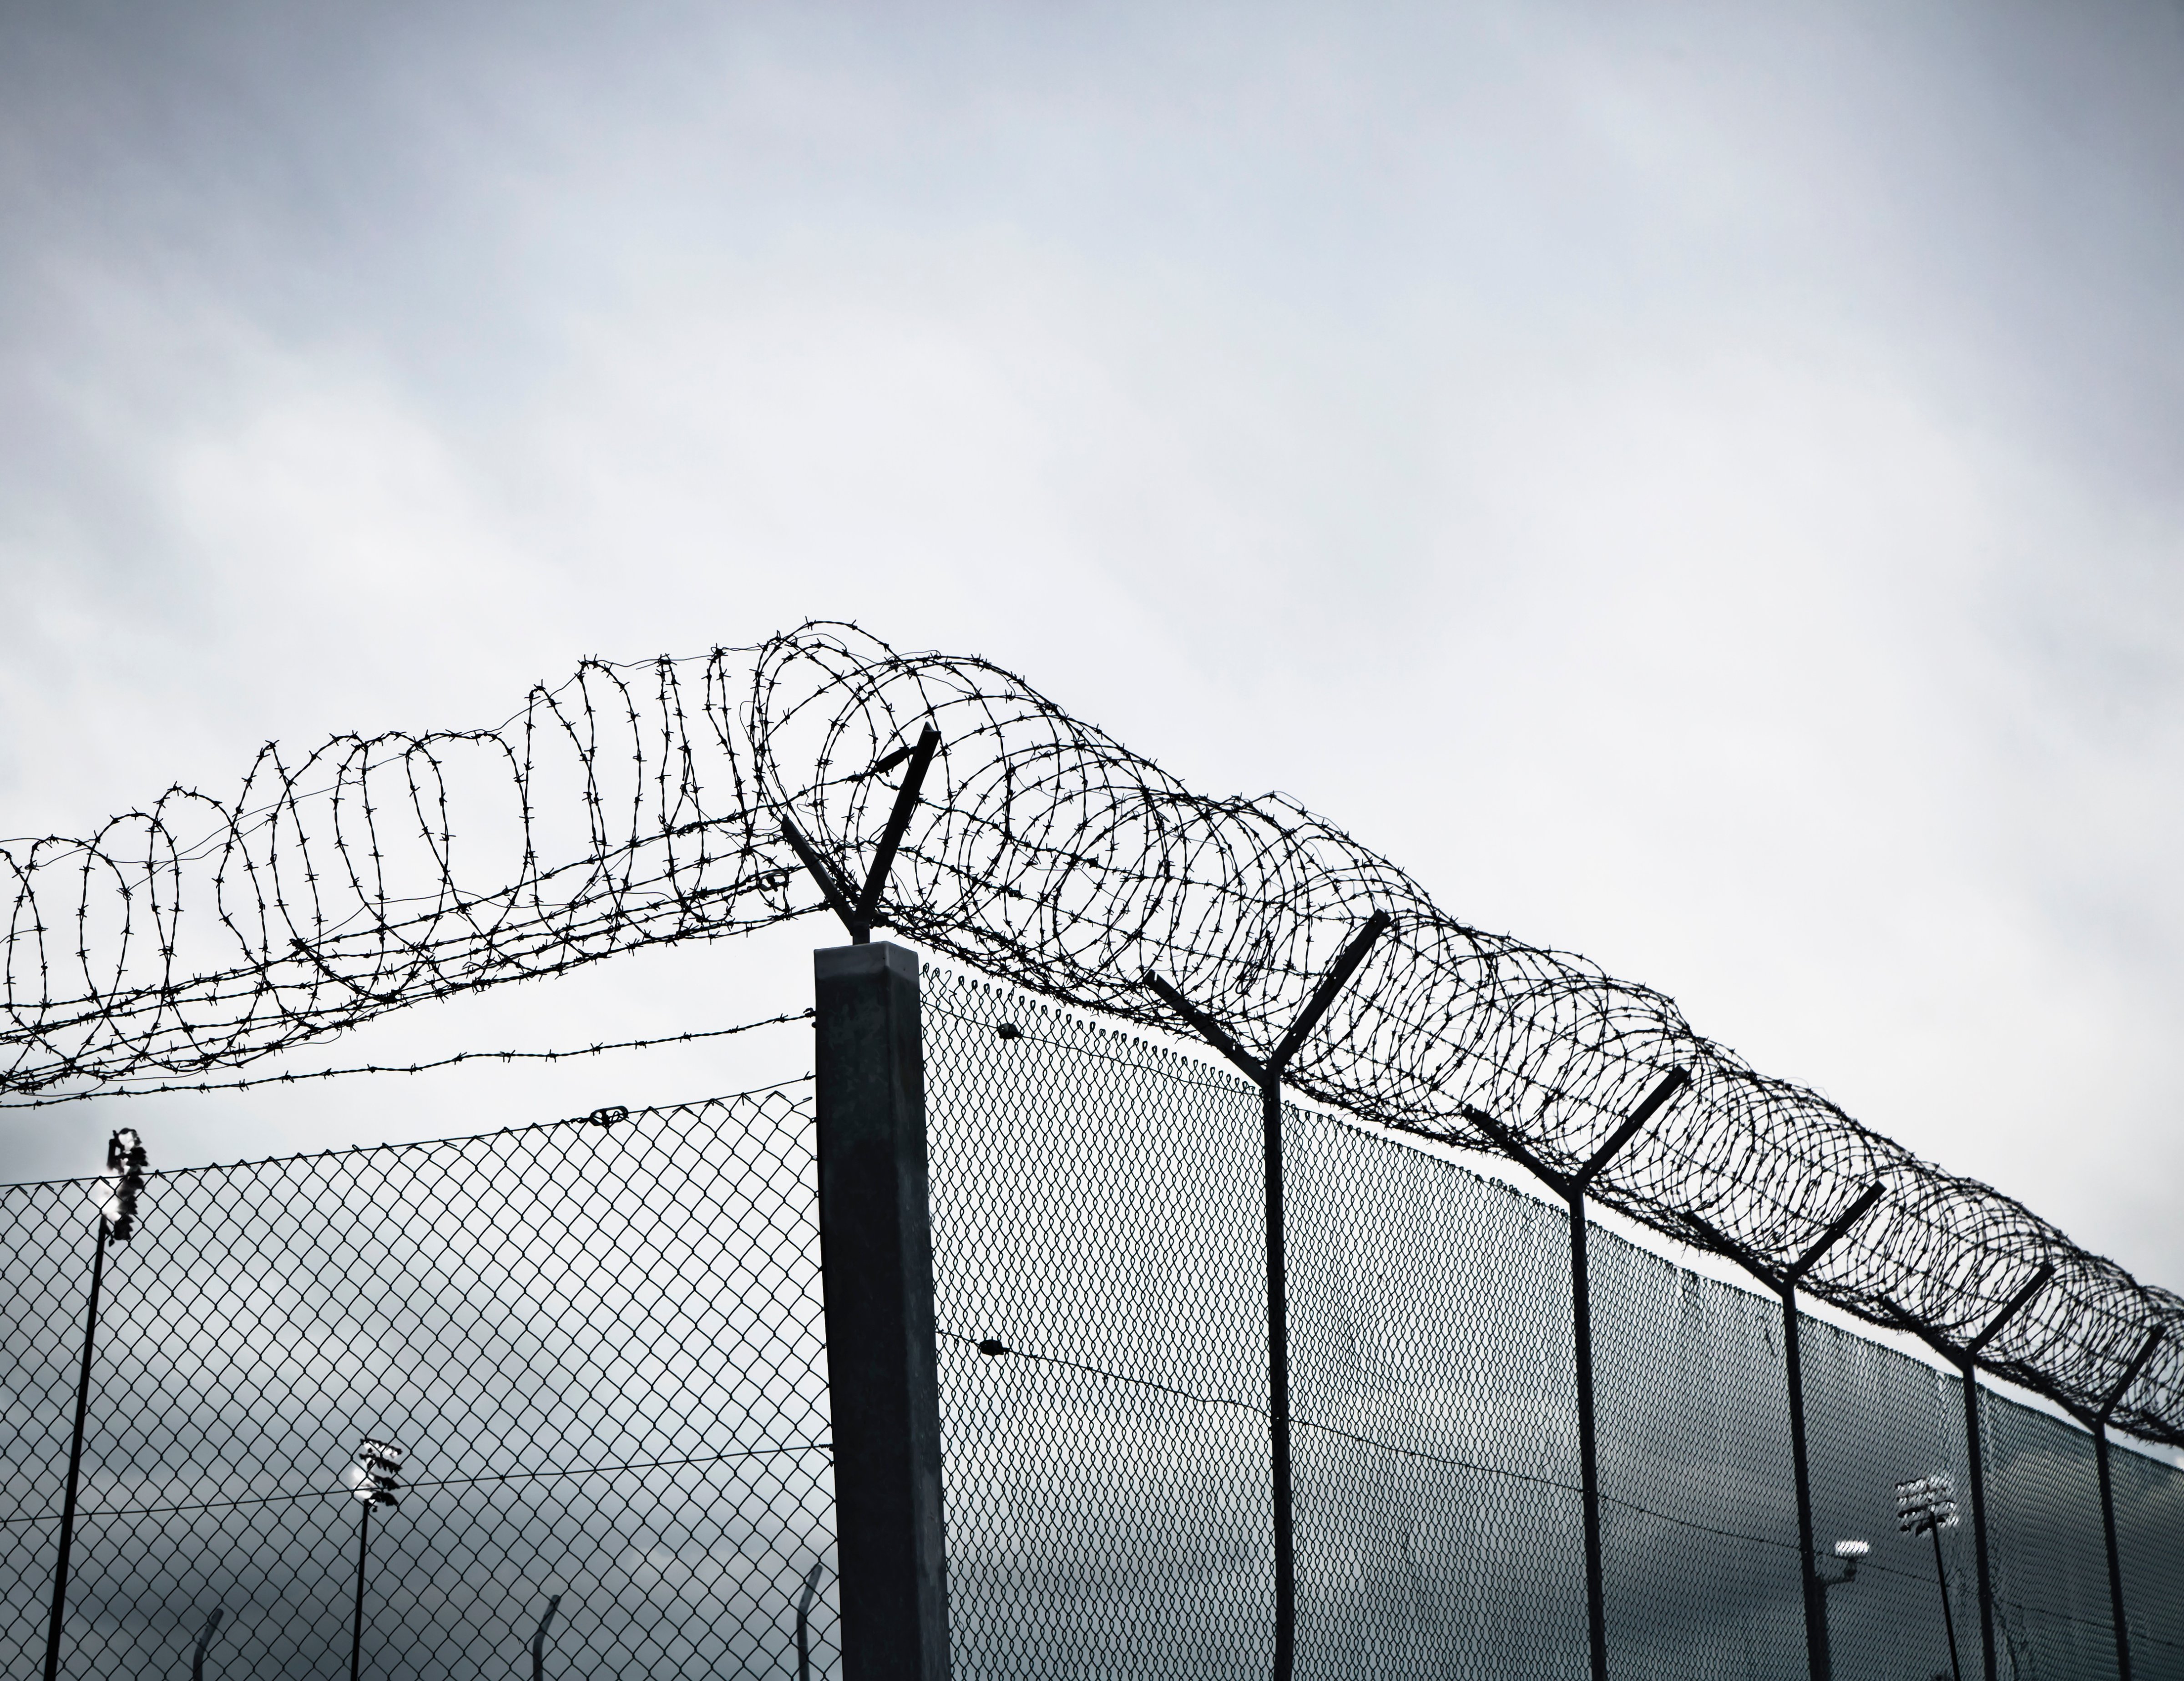 Chain link fence with barbed wire and razor wire